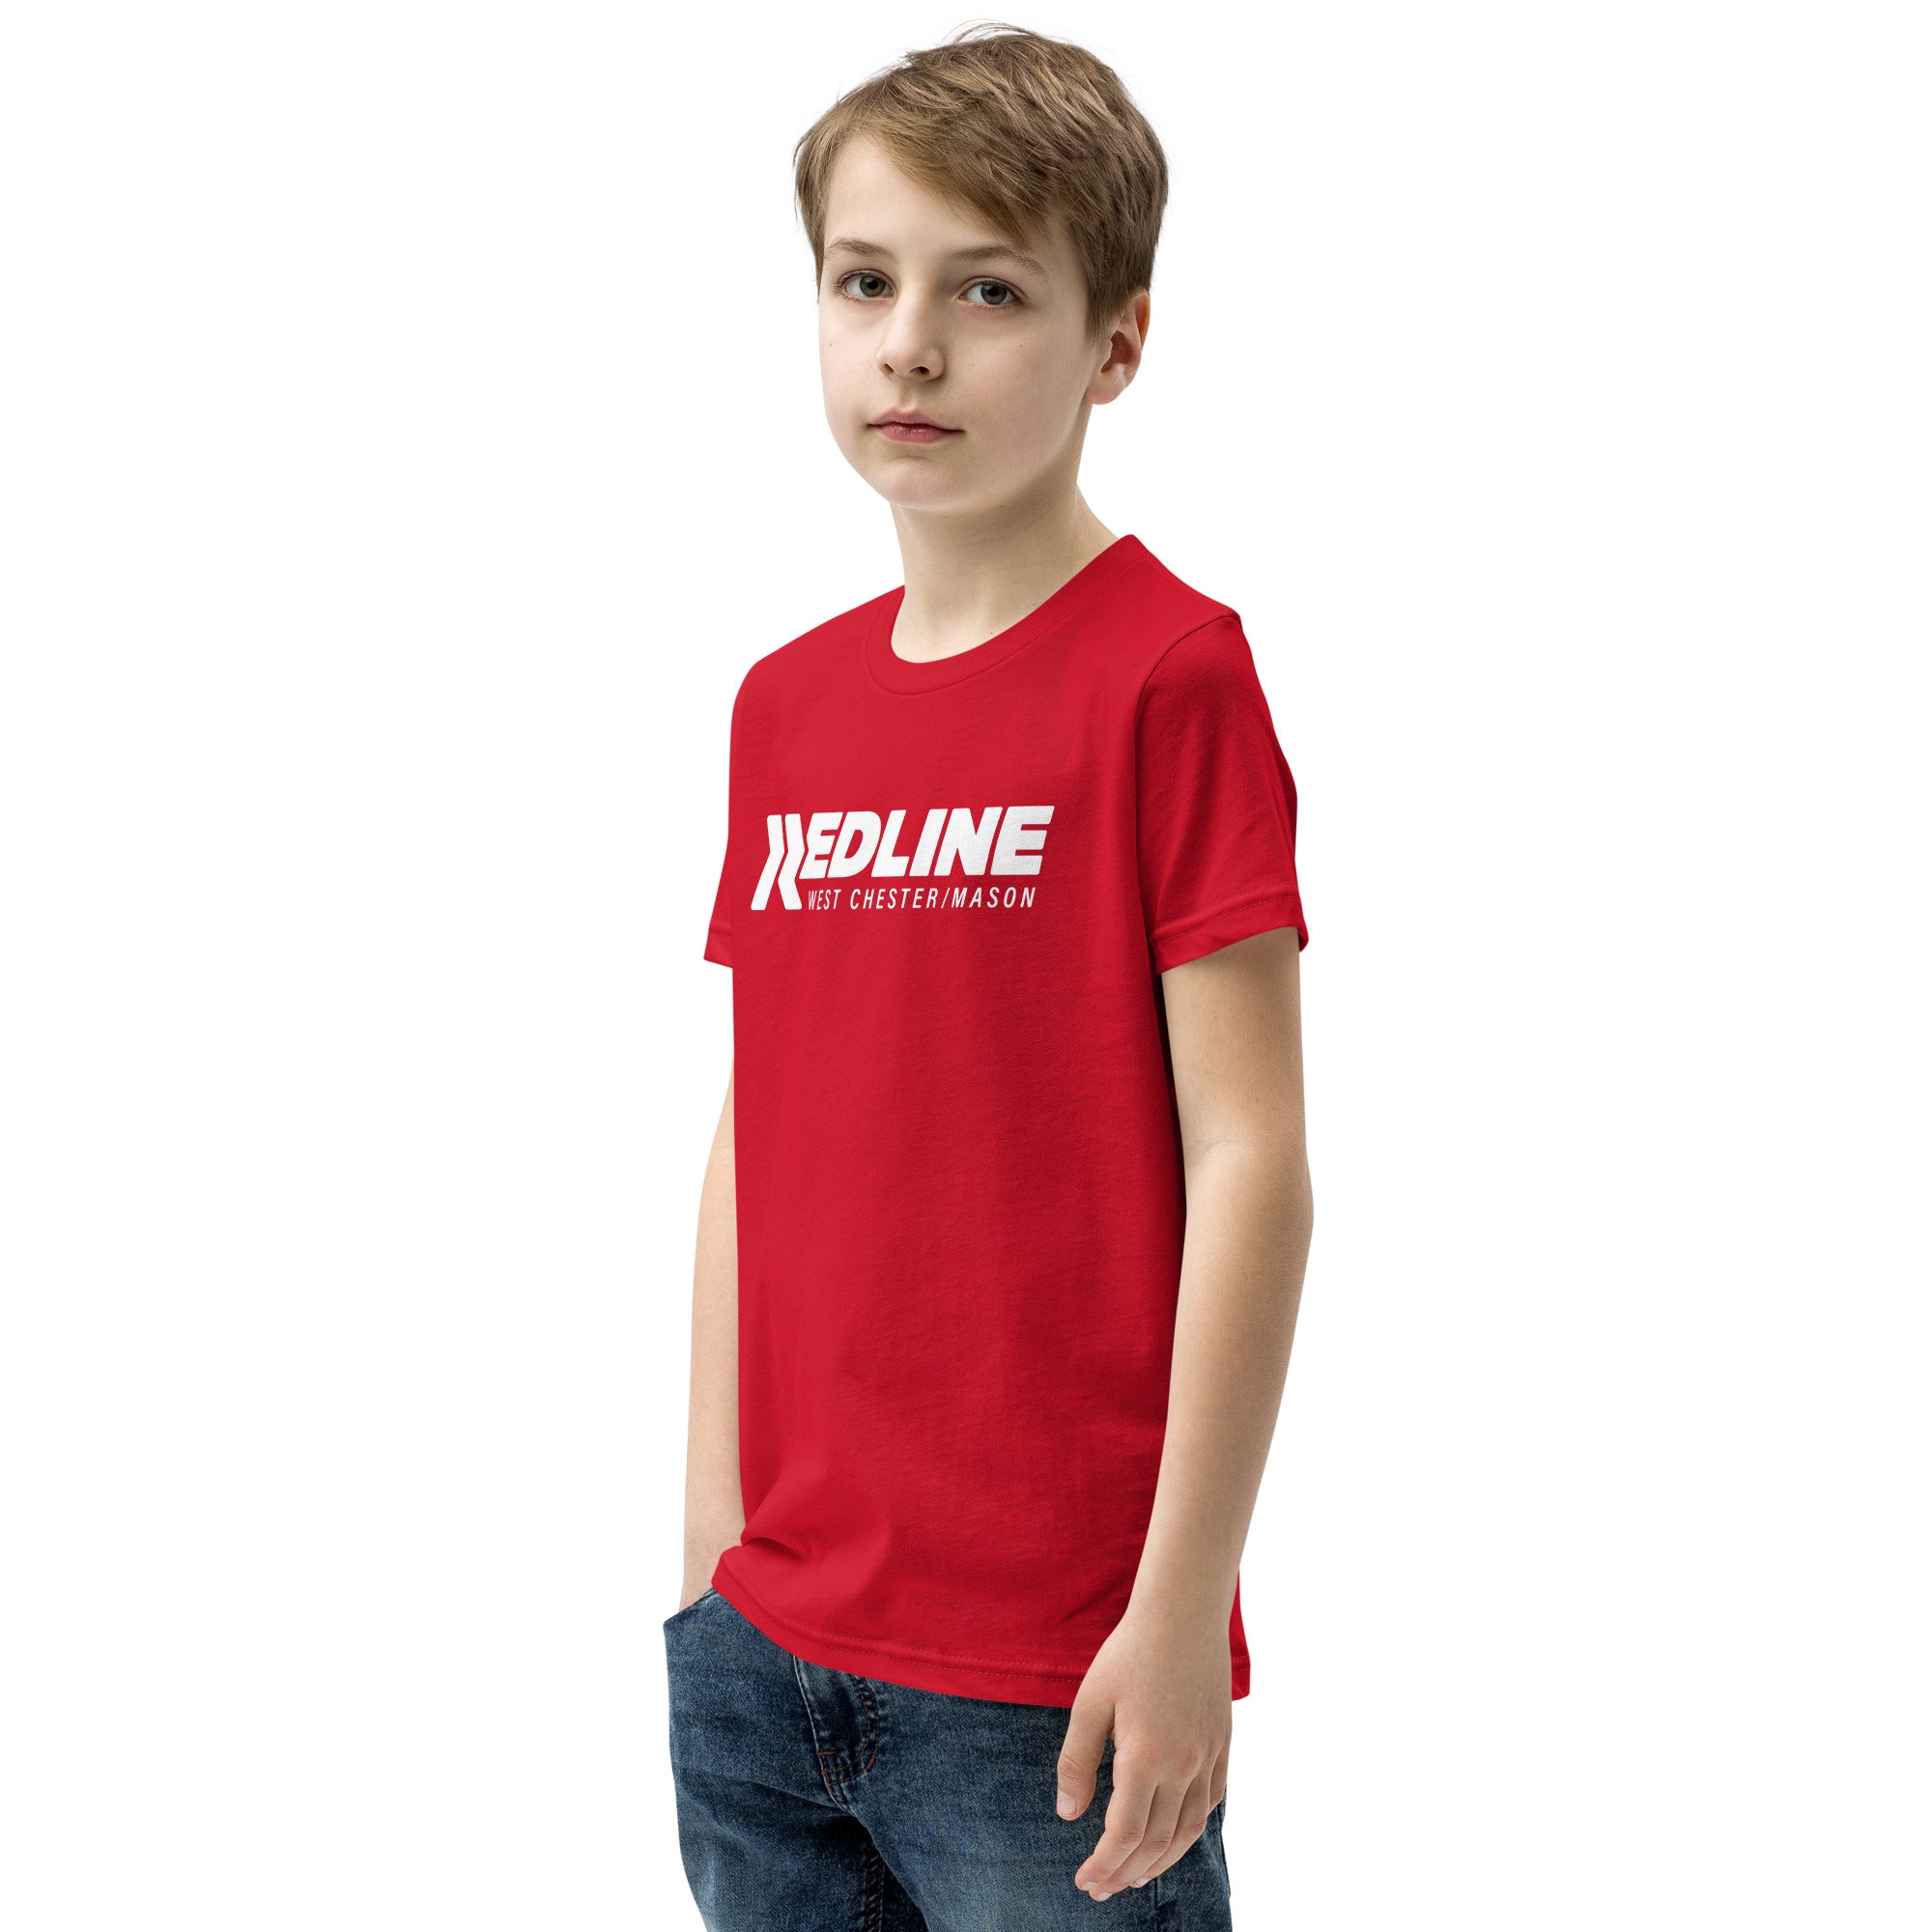 West Chester/Mason Logo W - Red Youth Short Sleeve T-Shirt